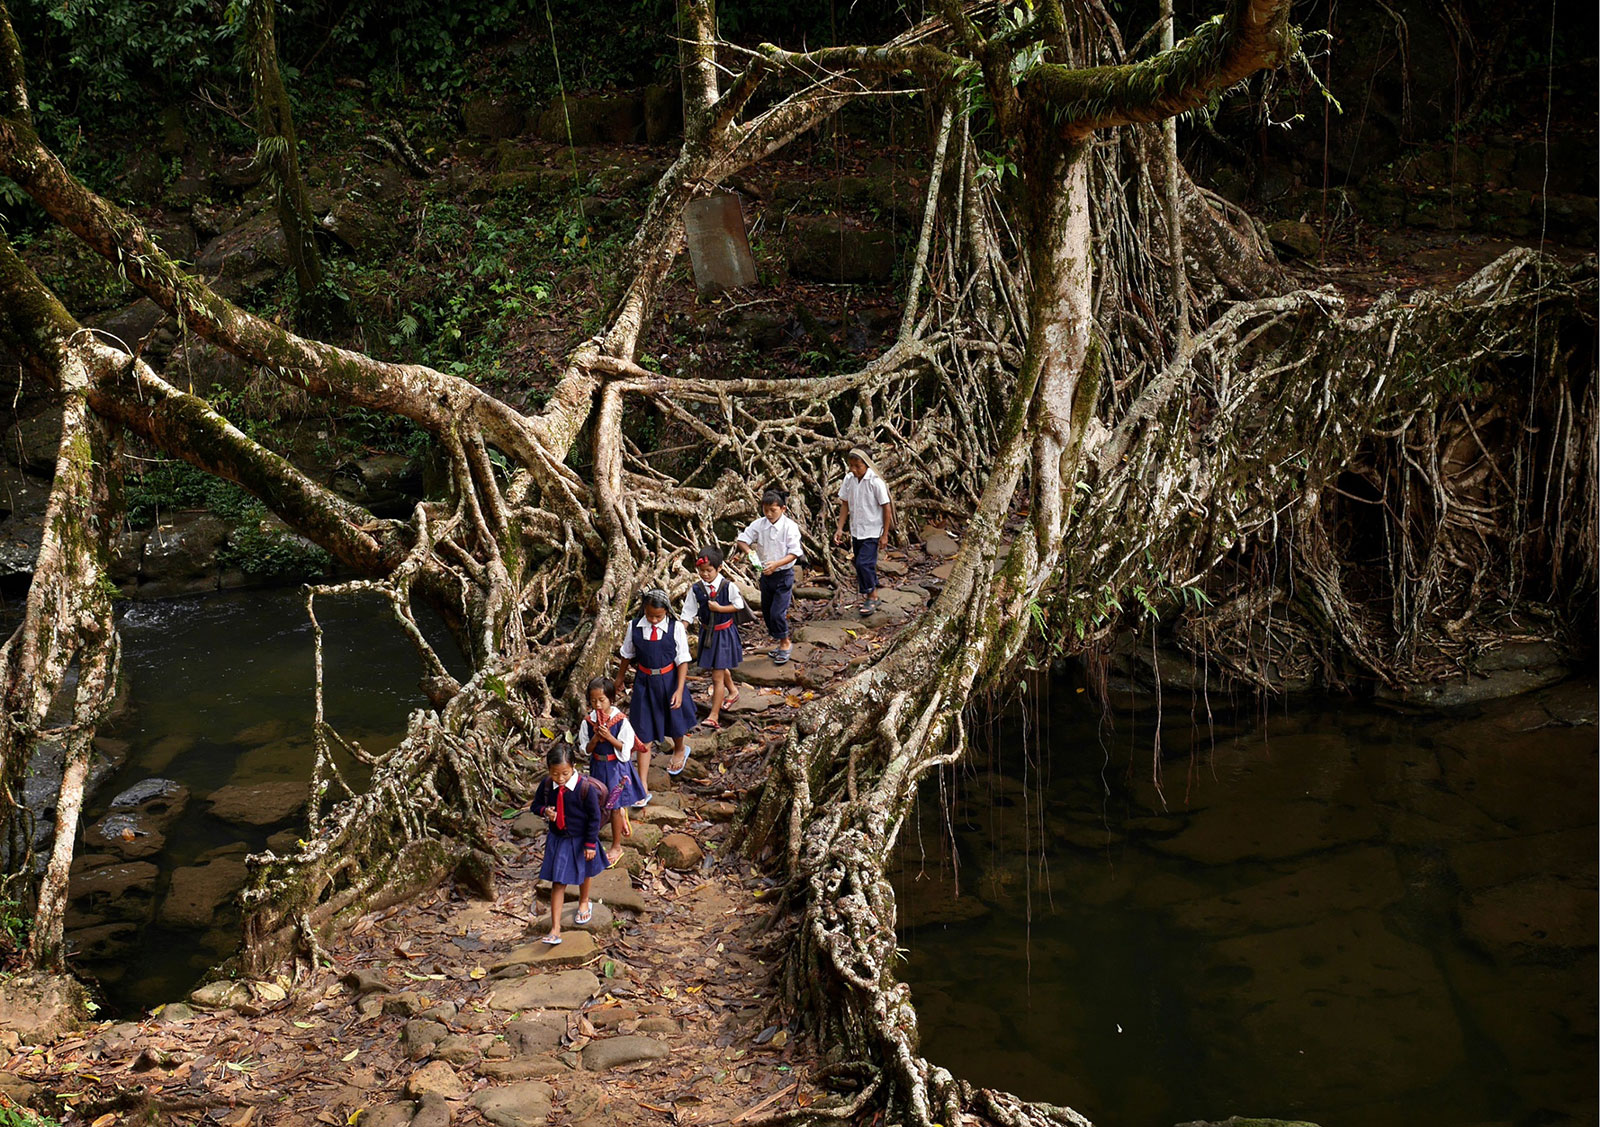 Students traveling through the forest across a tree root bridge in India